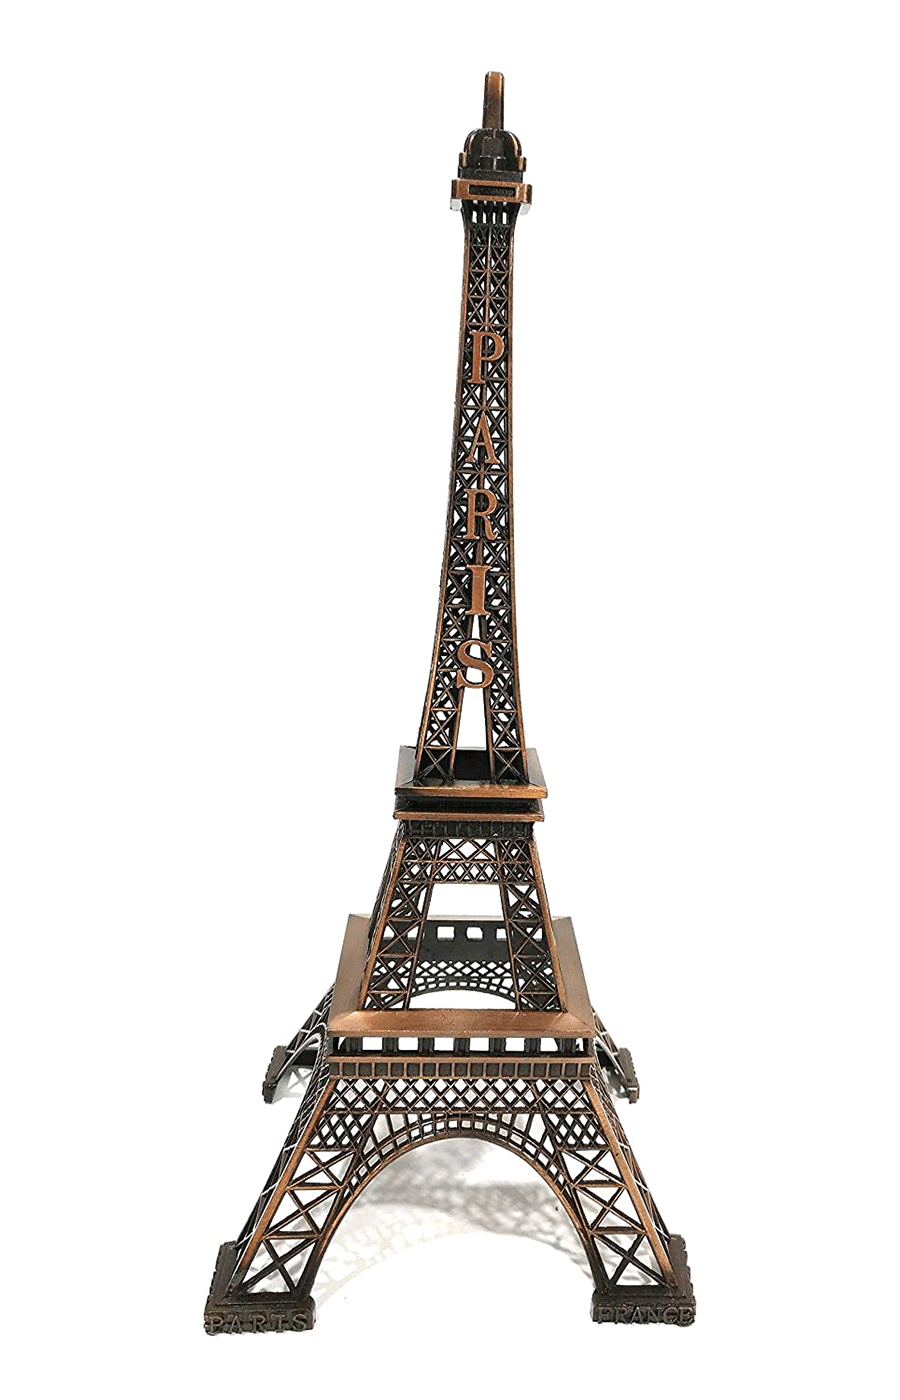 FunkyTradition 33 CM Tall Eiffel Tower Statue Metal Showpiece in Copper Metal | Birthday Anniversary Gift and Home Office Decor 13" Tall